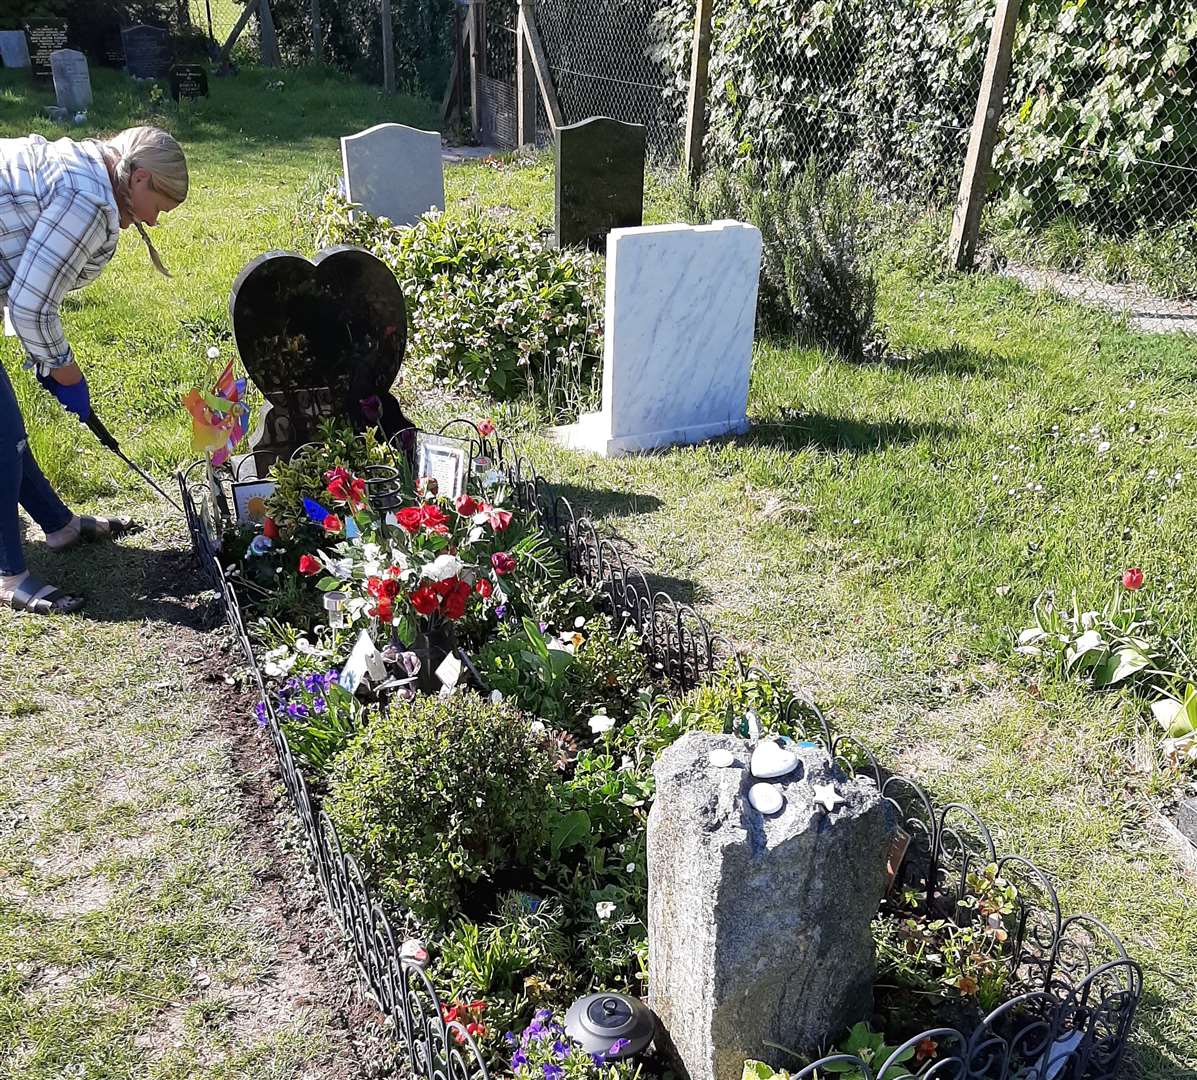 Liam's grave is well-maintained thanks to the effort of his loved ones